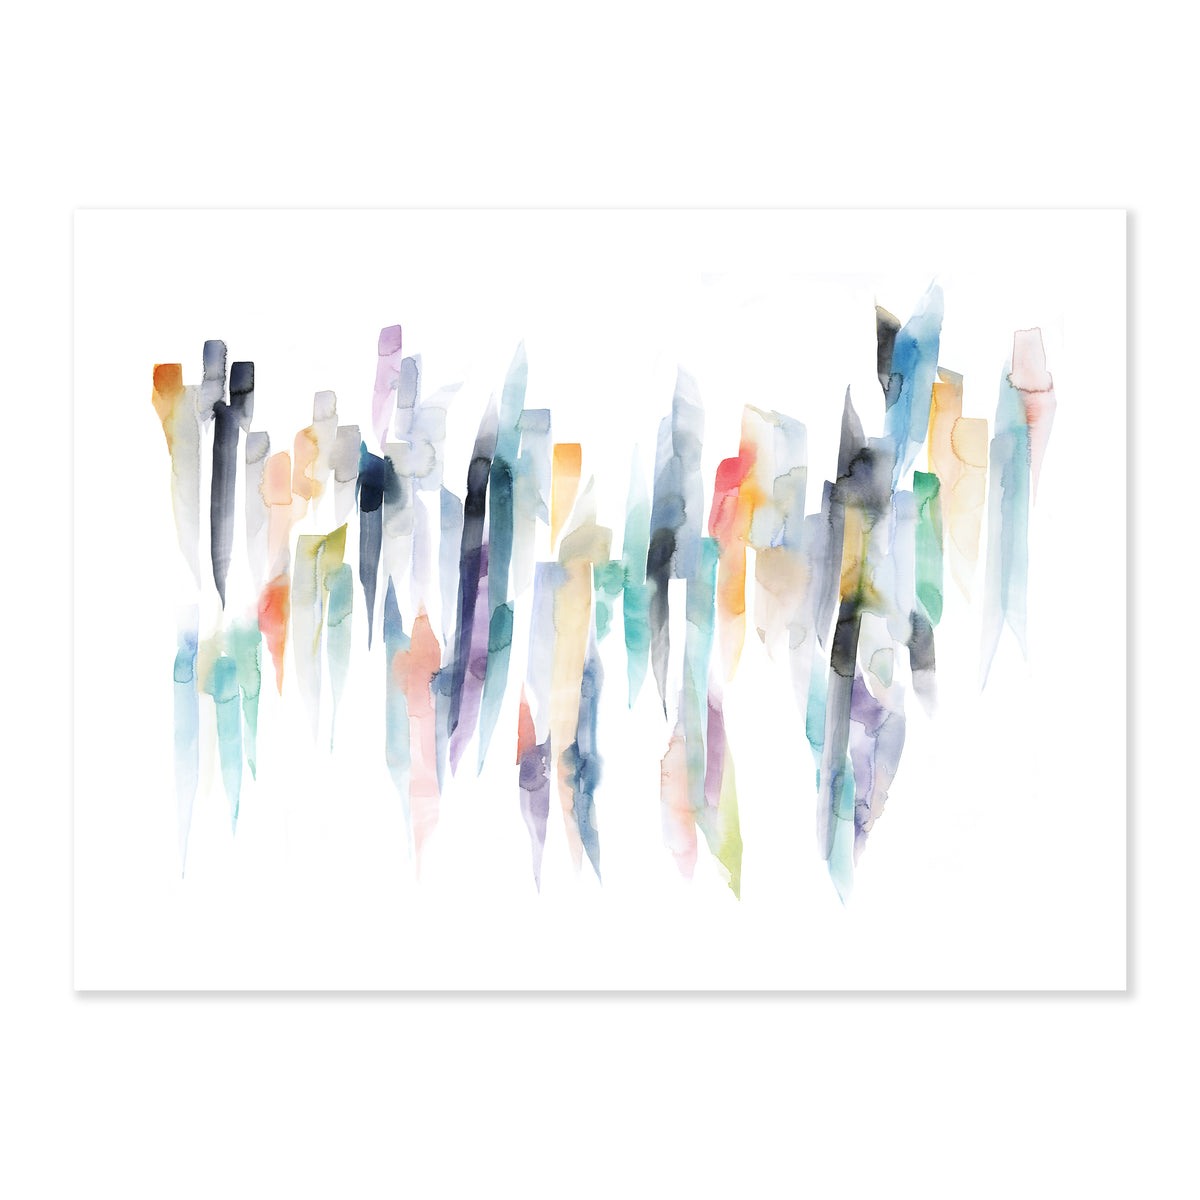 A fine art print illustrating abstract vertical stripes of various lengths in orange green blue purple and black hues in watercolor on a soft white background